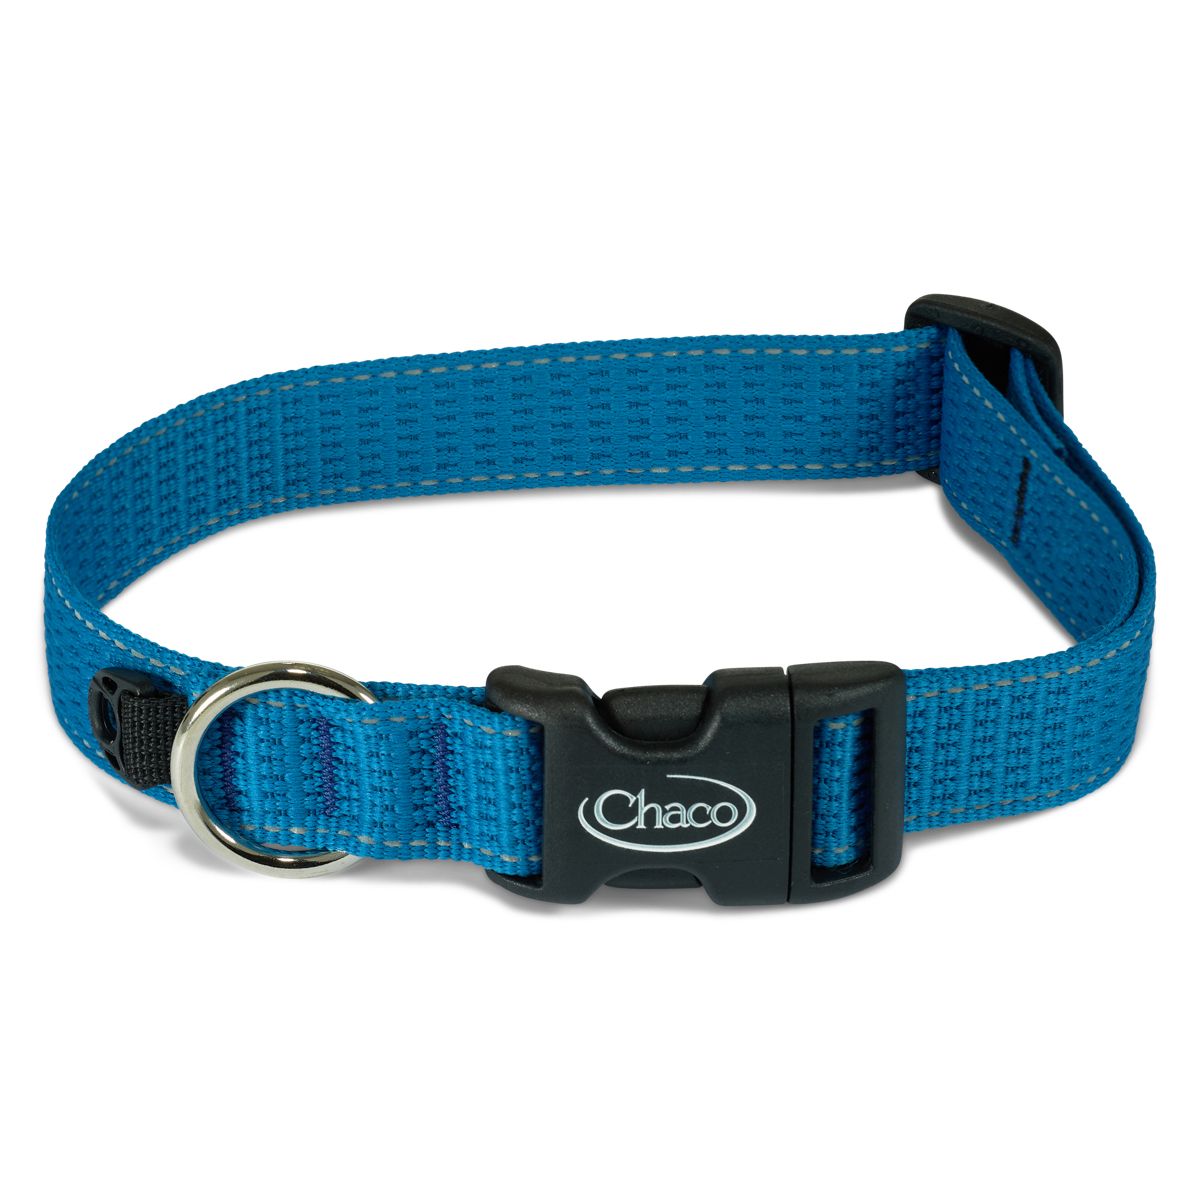 dog collars for sale near me